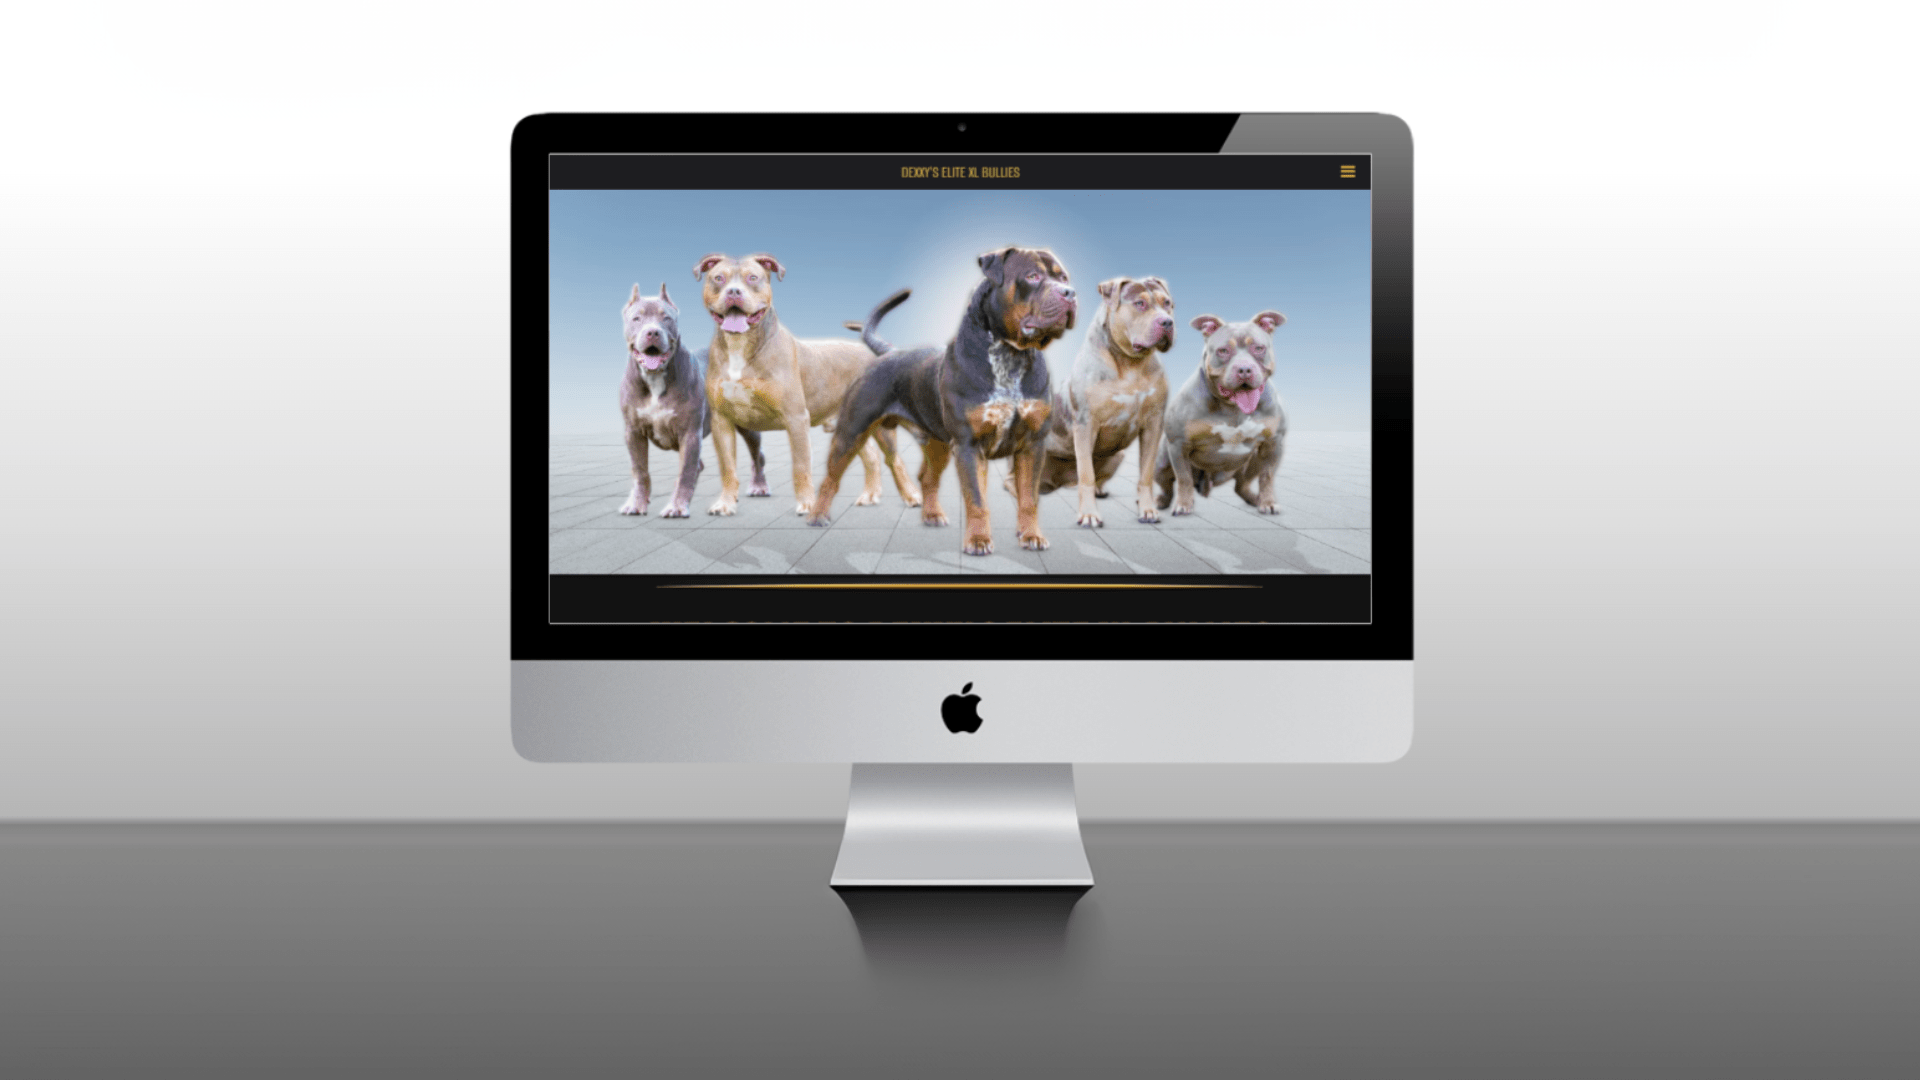 Why a Dog Breeder Web Design is Effective for Sales Than Social Media